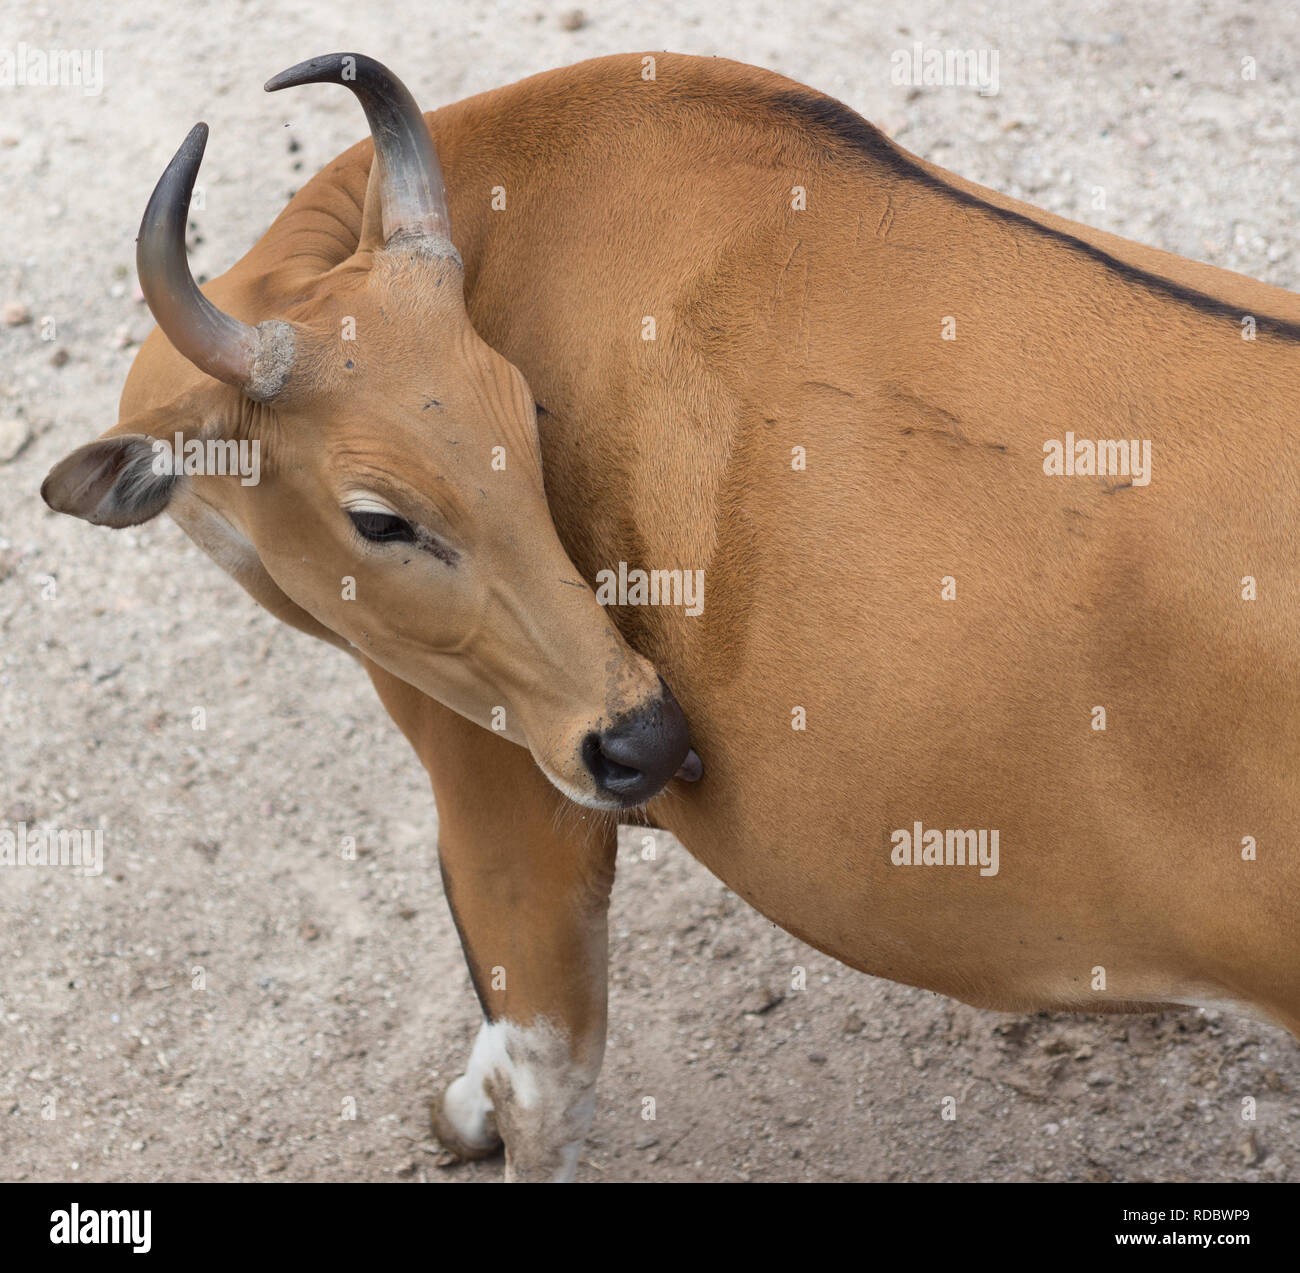 Top view of brown cow Stock Photo - Alamy